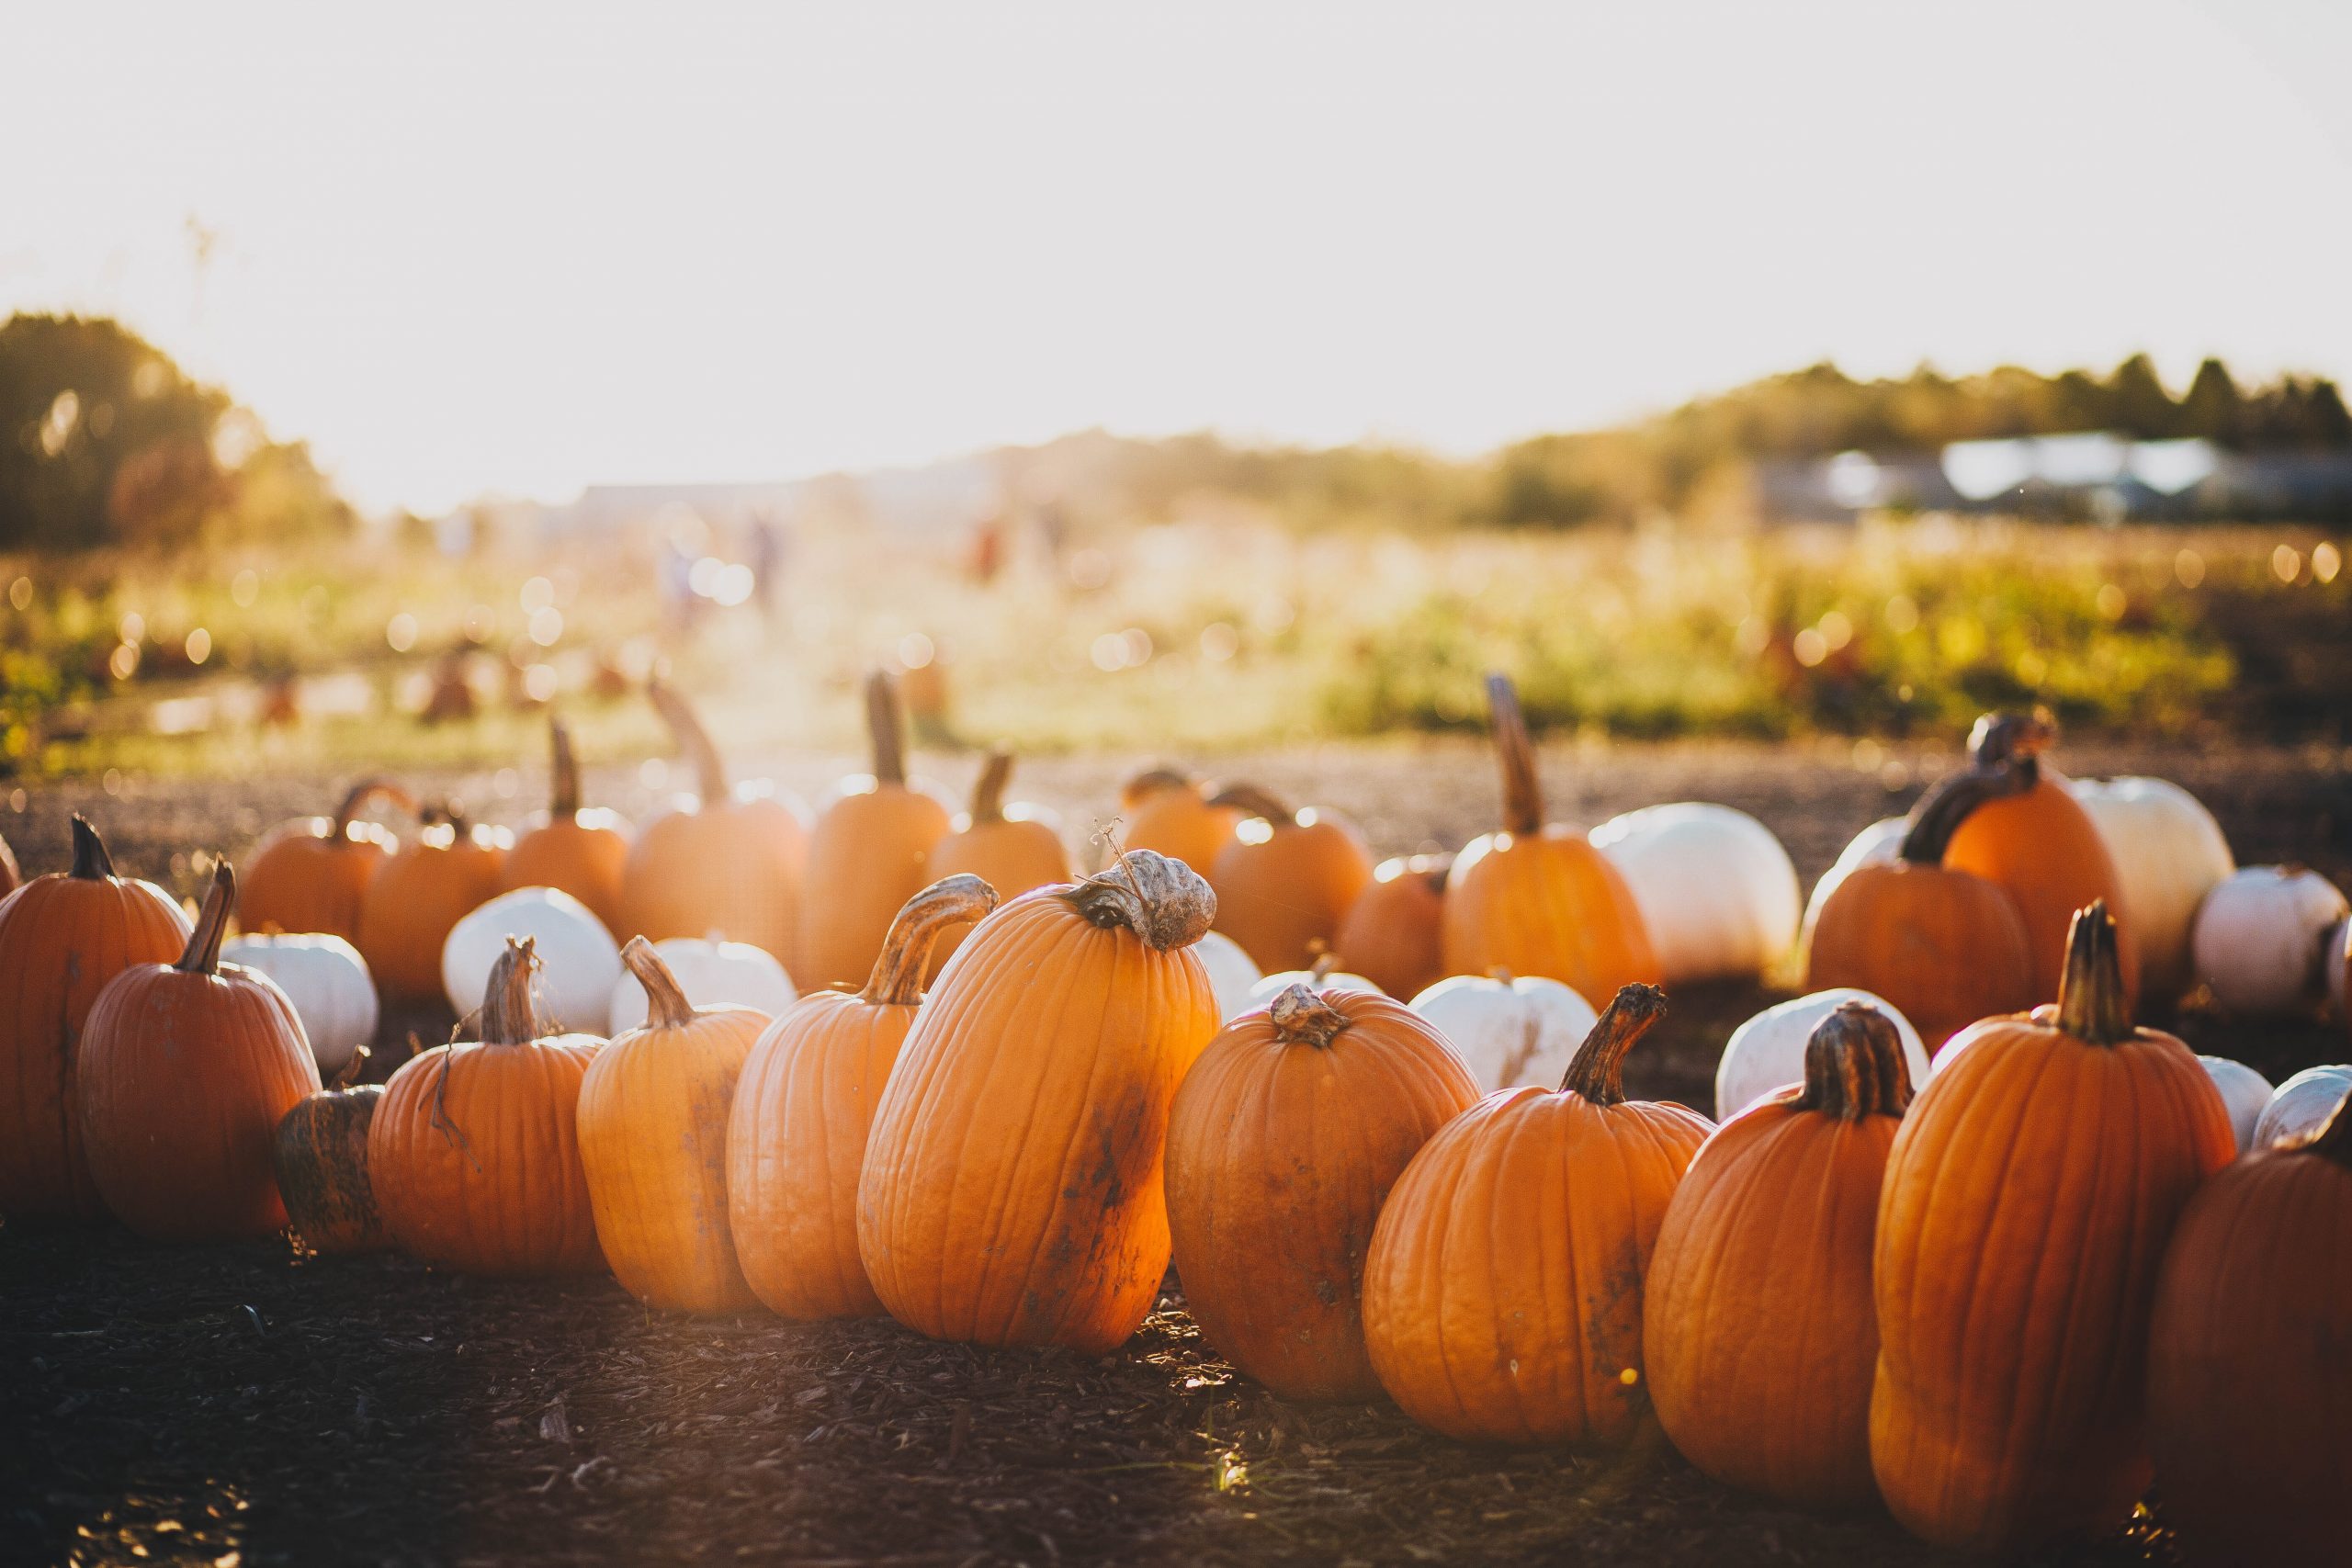 Explore NYC Pumpkin Patches 1 Hour Away From The Sagamore, Upper West Side